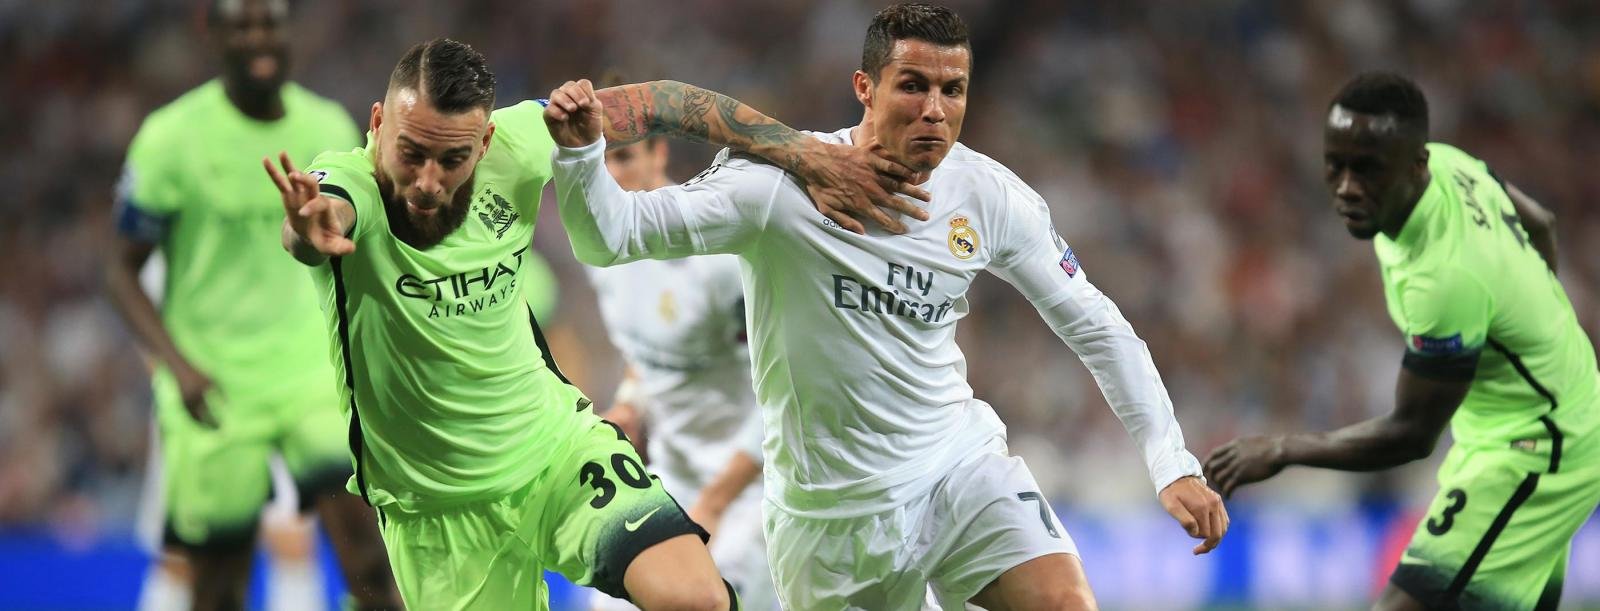 Champions League Round-Up: Man City crash out as Real Madrid set up all-Madrid final